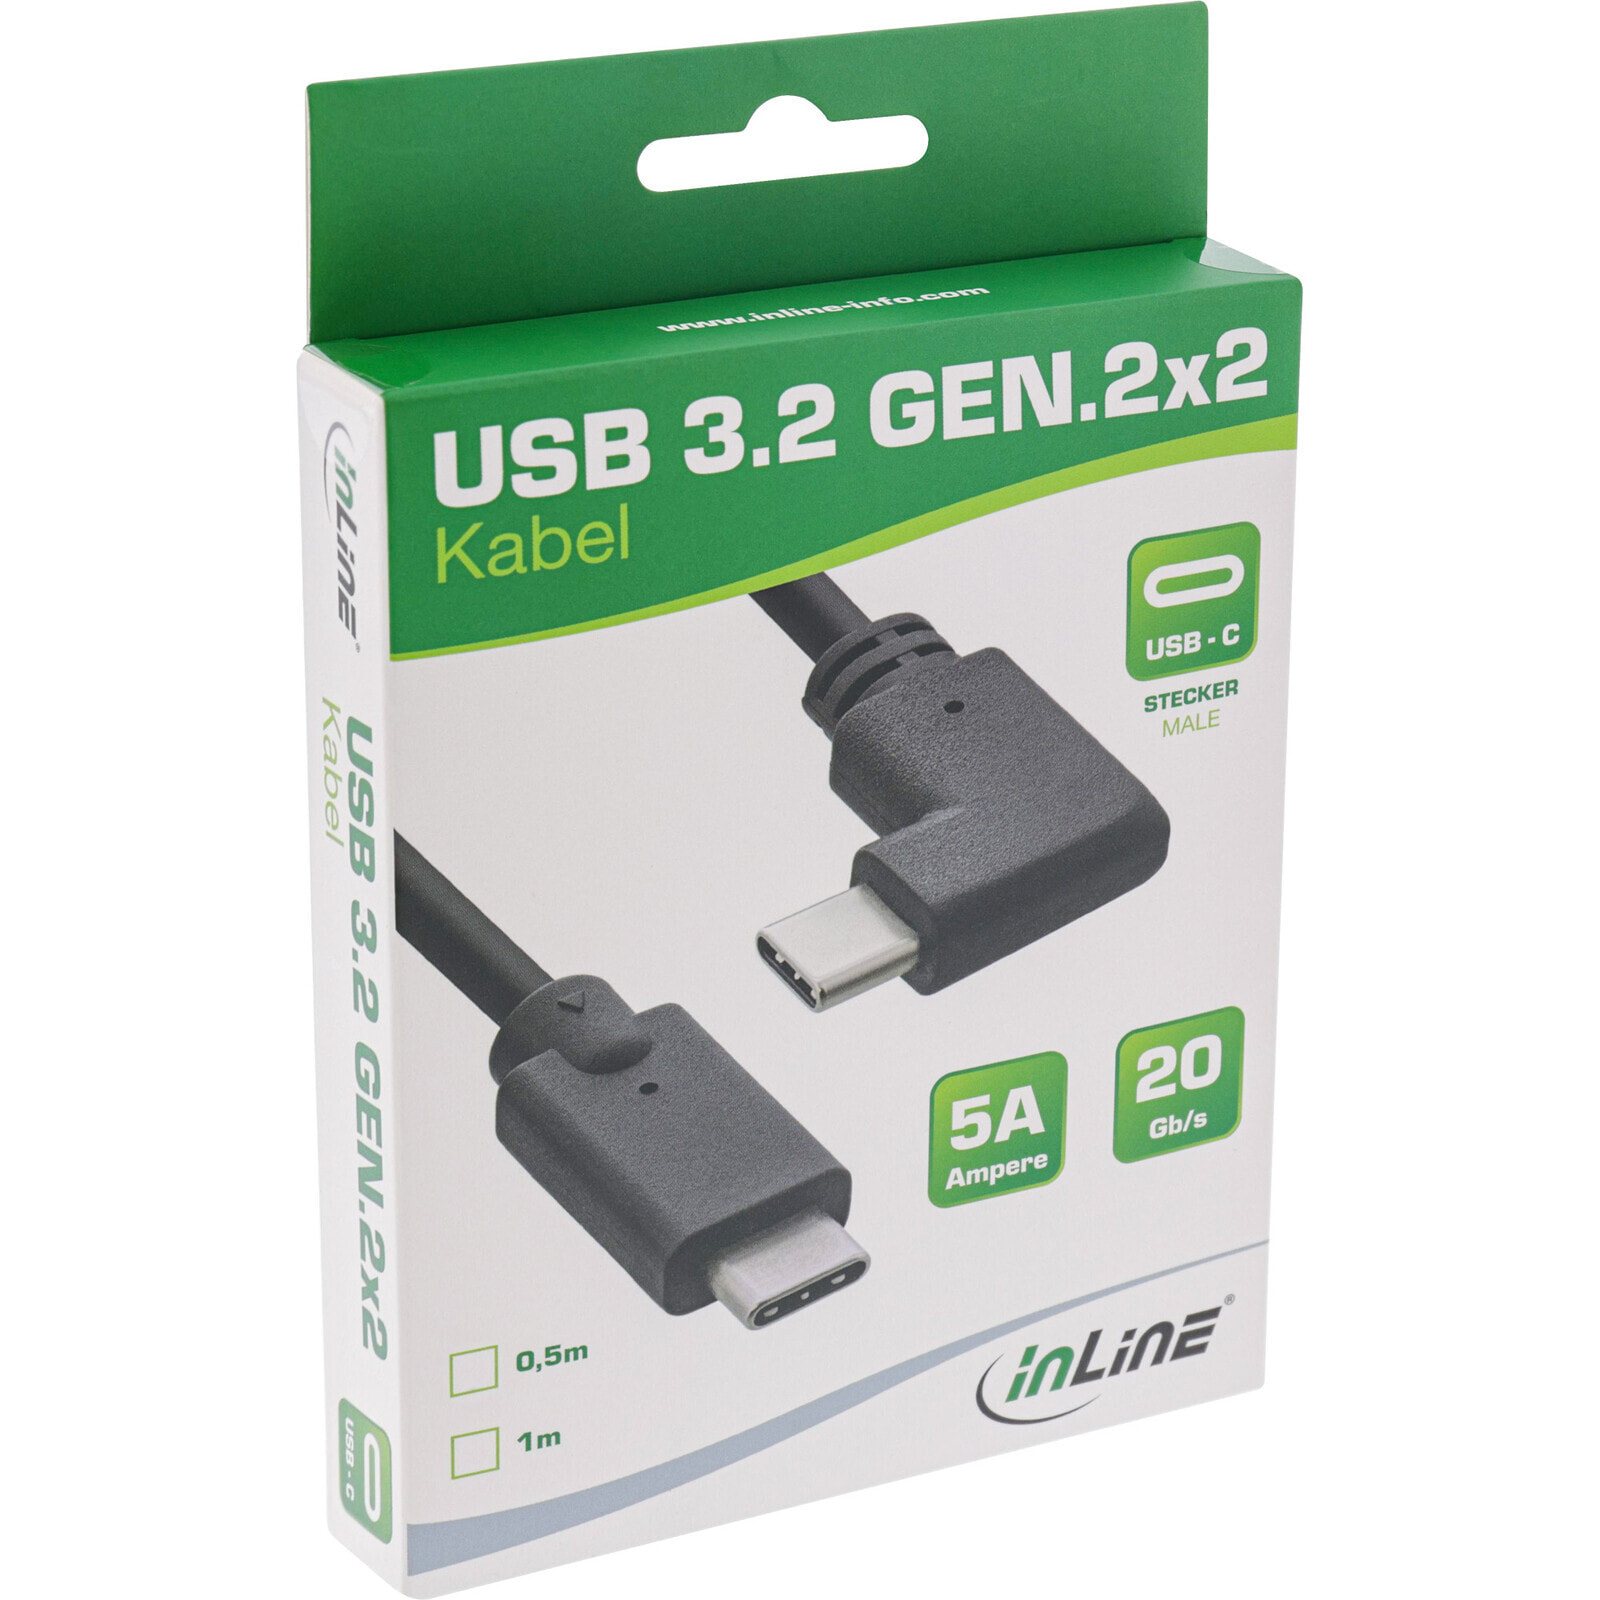 USB 3.2 Gen.2 cable - USB Type-C male/male angled - black - 0.5m - 0.5 m - USB C - USB C - USB 3.2 Gen 2 (3.1 Gen 2) - 20000 Mbit/s - Black